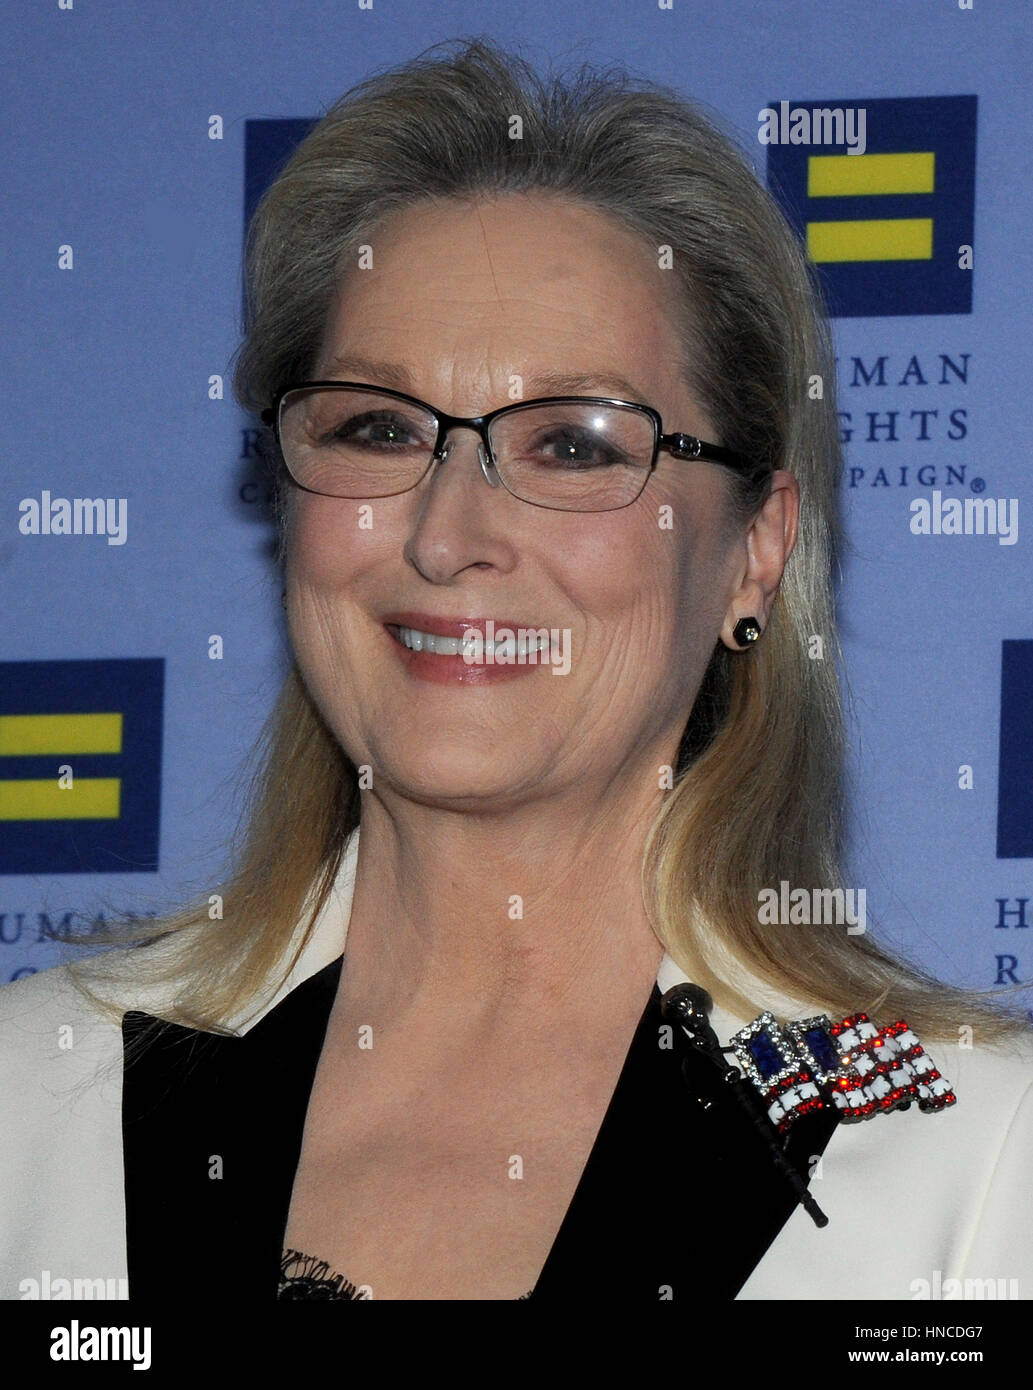 New York, New York, USA. 11th Feb, 2017. Honoree Meryl Streep attends the 2017 Human Rights Campaign Greater New York Gala on February 11, 2017 at the Waldorf Astoria in New York City. Photo by: John Palmer/MediaPunch Stock Photo